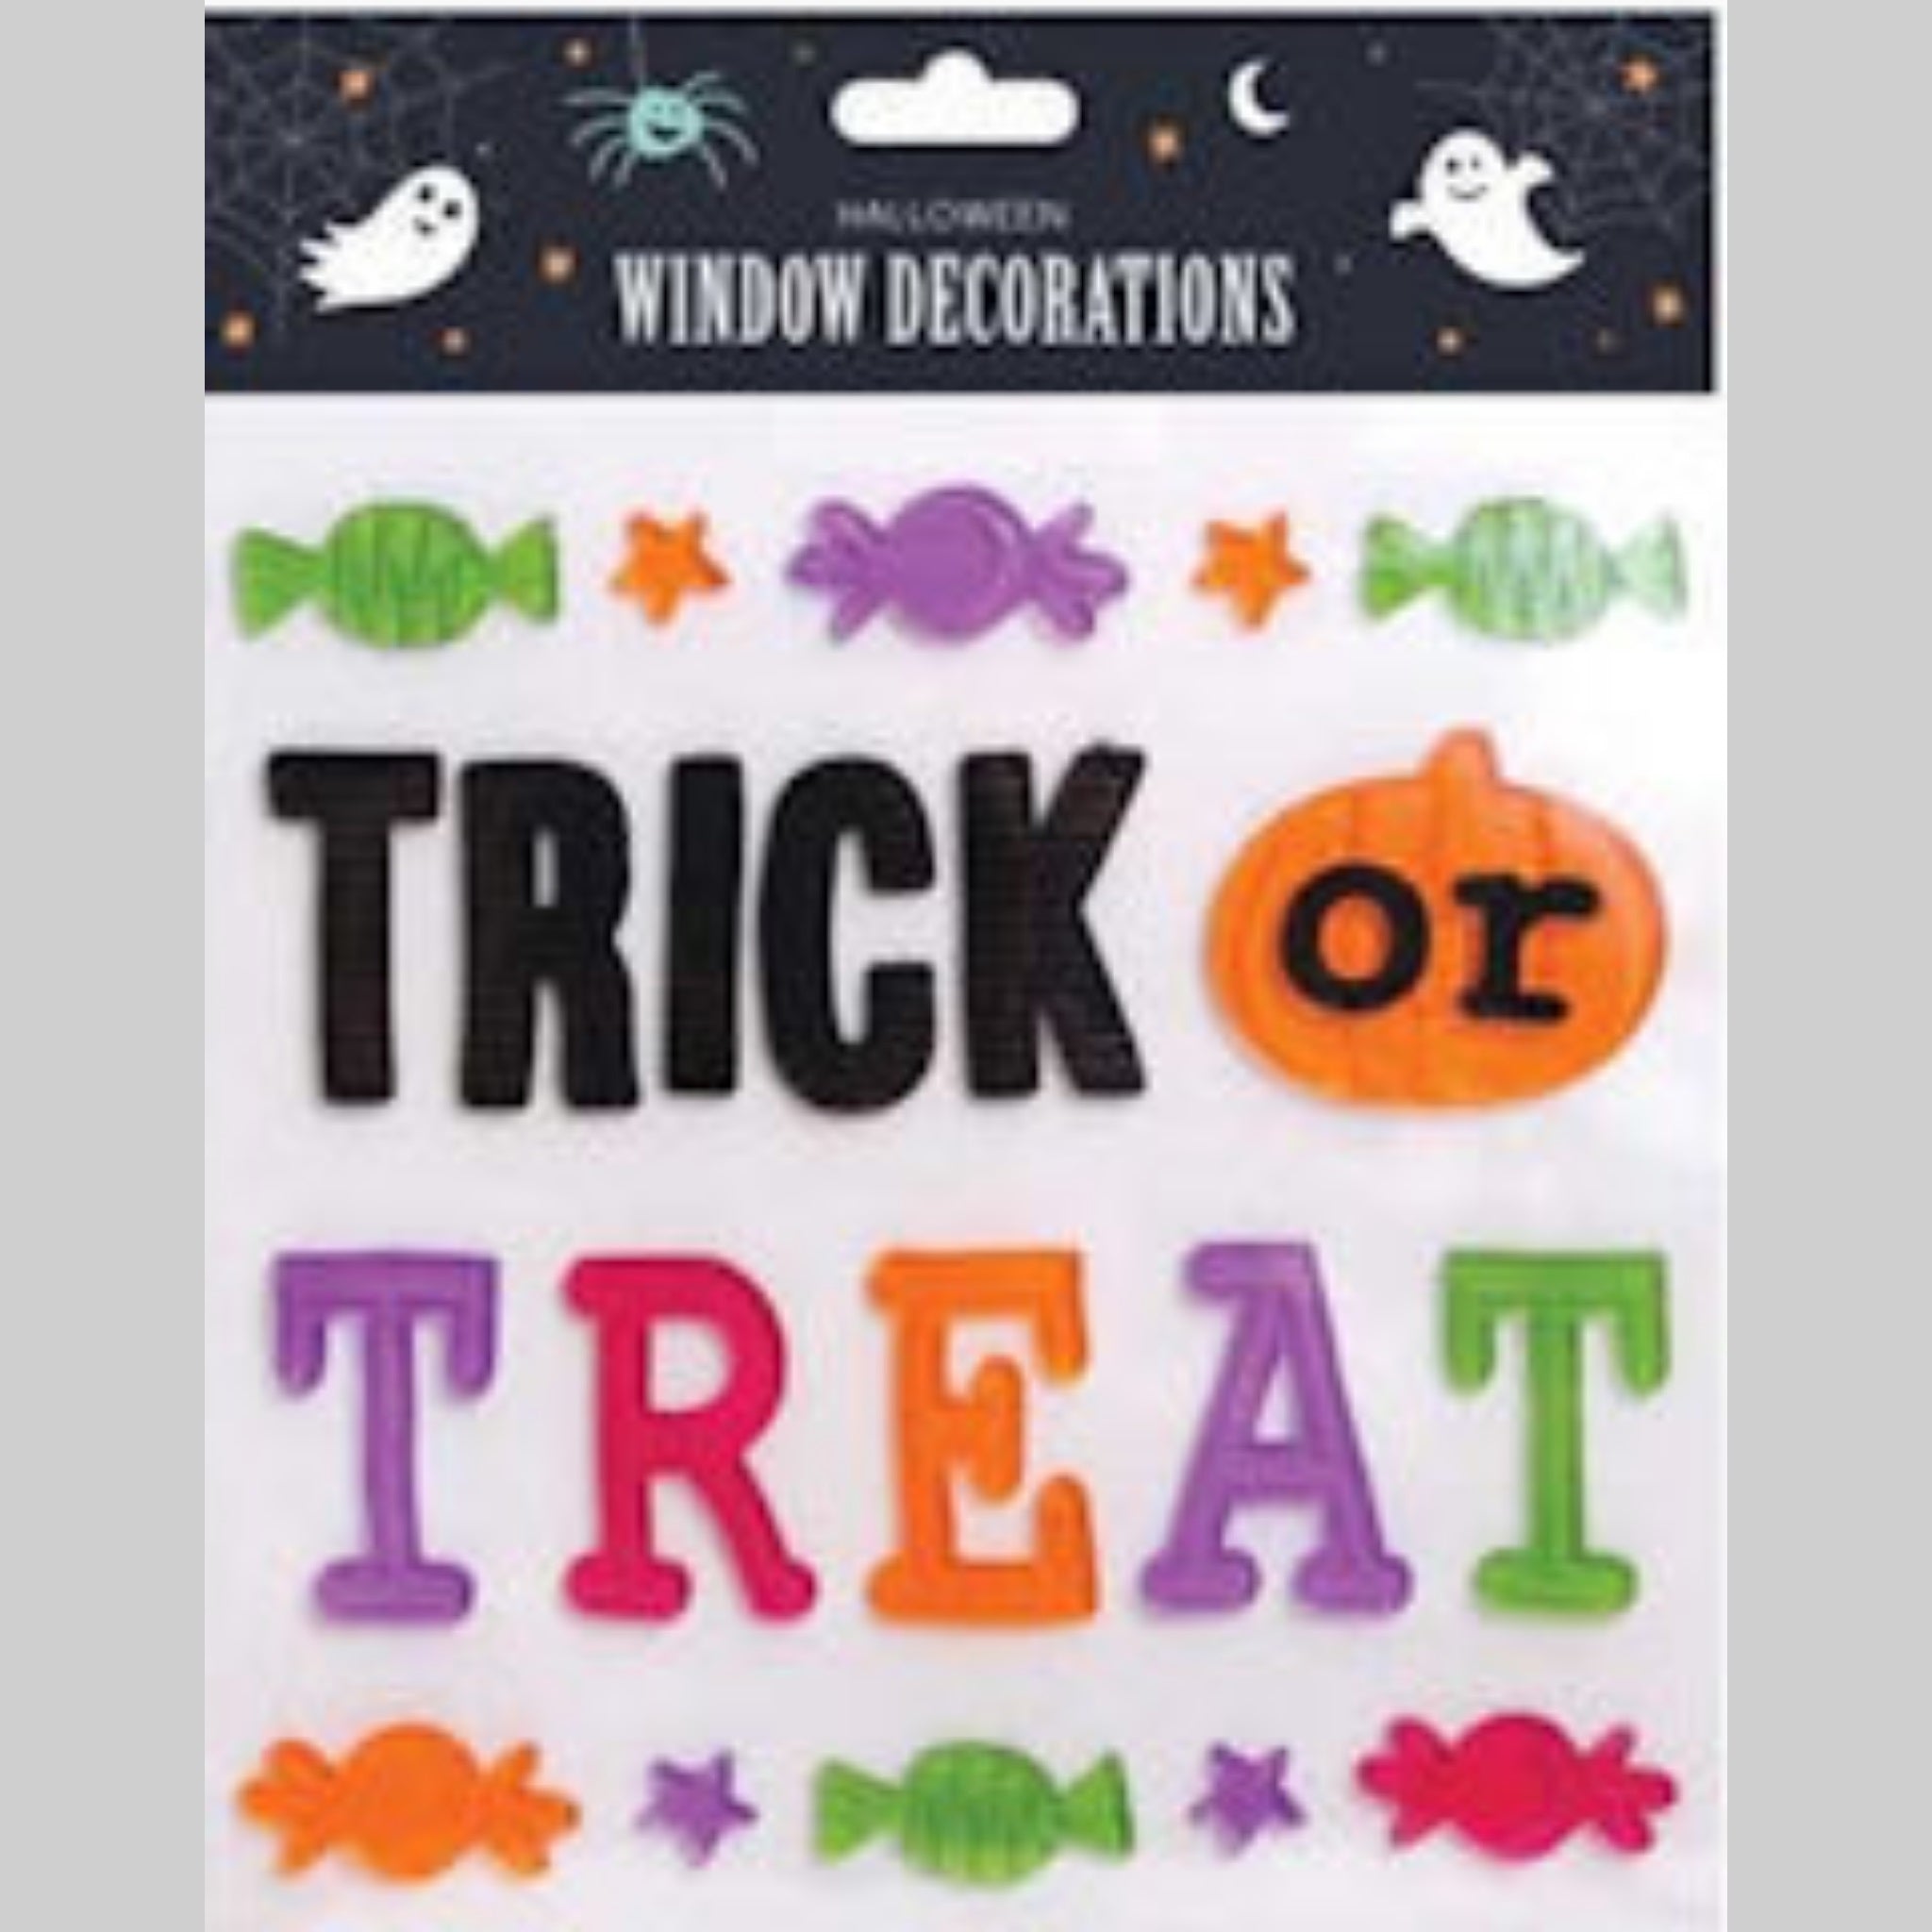 Beclen Harp Halloween Character Gel Clings Window Stickers Decoration/ Assorted Boo To You Trick To Treat Spooky Scary House Party Decorations